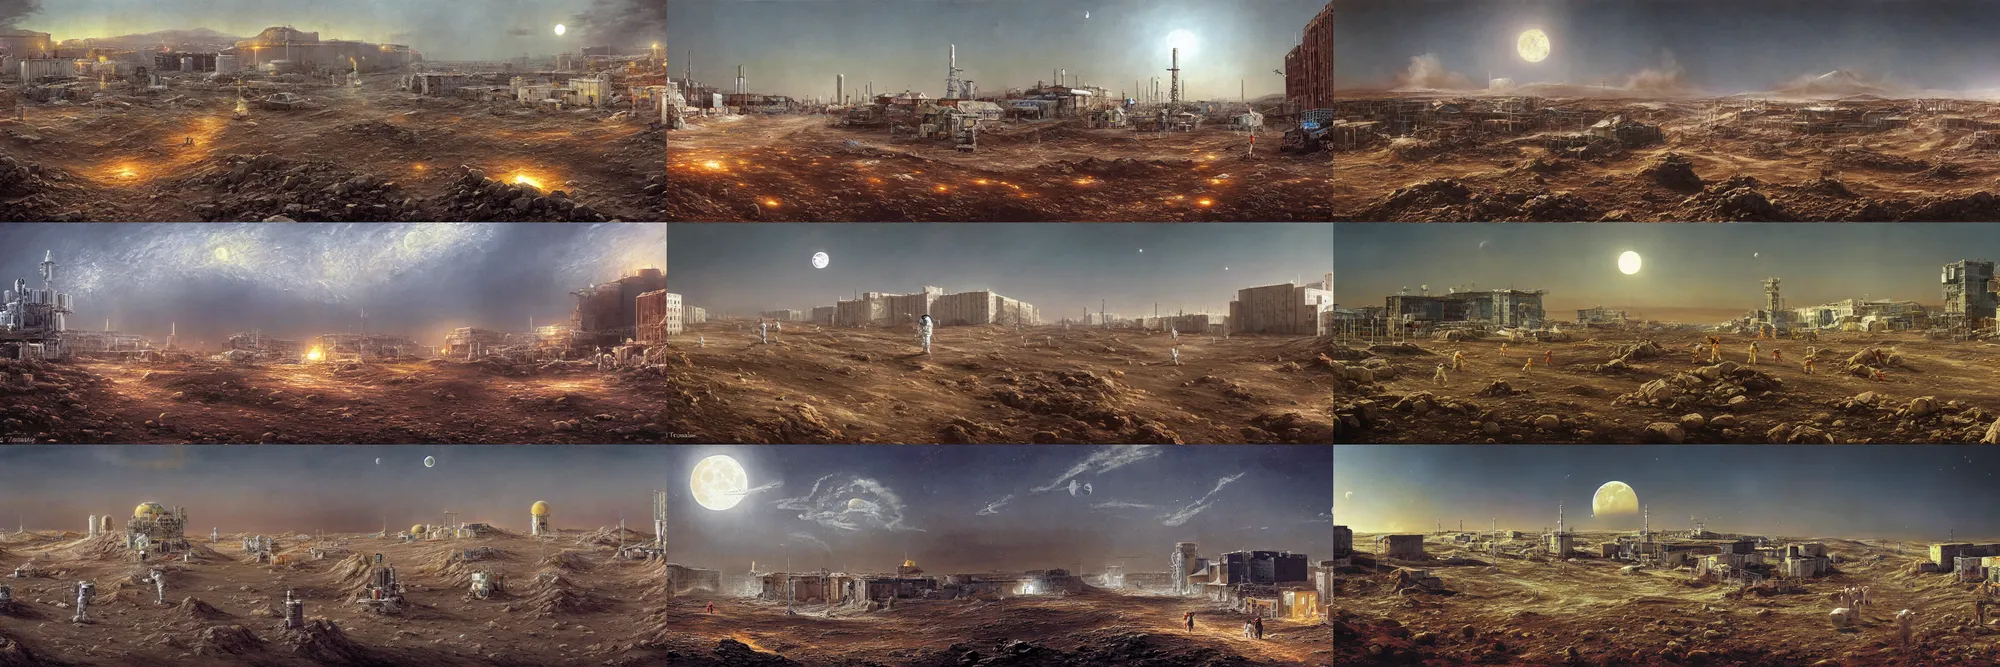 Prompt: painting of a lunar soil norilsk city, moonwalker photo, lunar soil, busy street, city street on the moon, future norilsk street base, sci - fi, detailed, by thomas cole